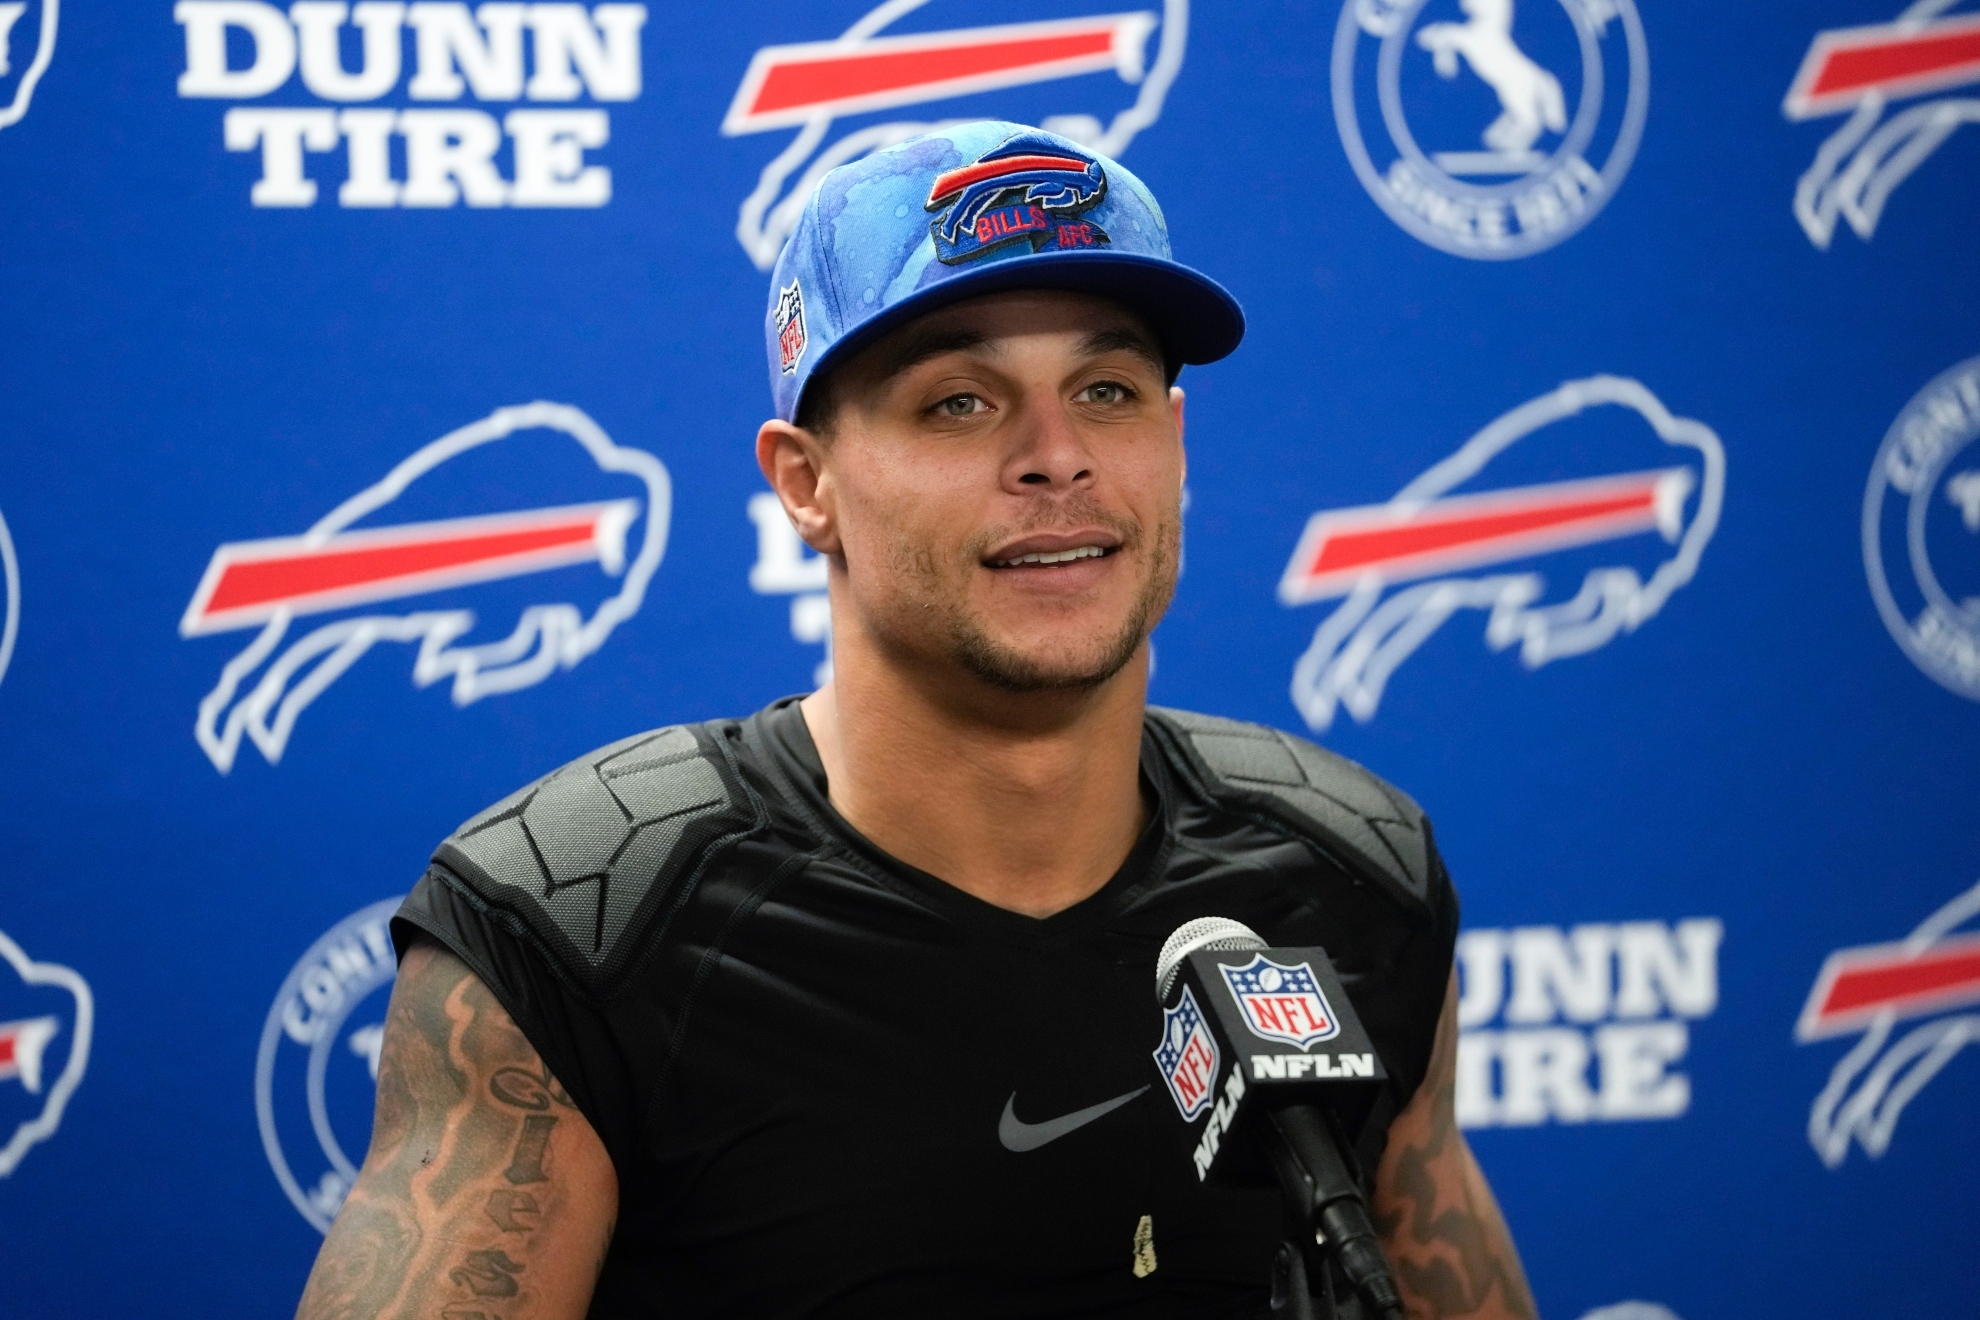 Jordan Poyer forced to cancel annual colf charity event at Trump National due to location controversy